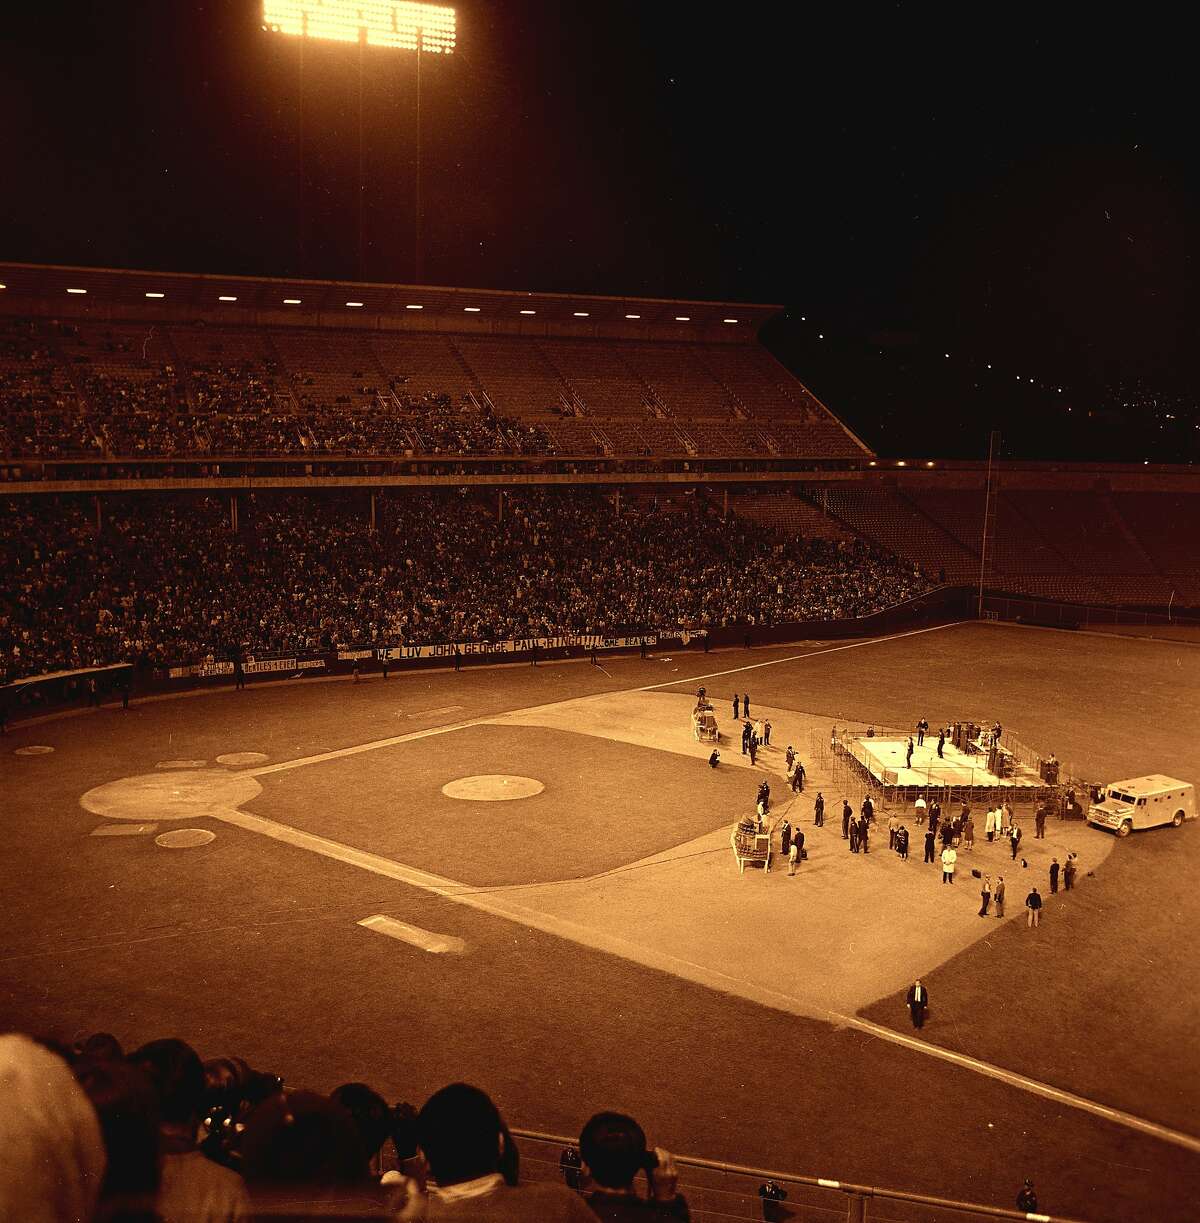 The Beatles perform at Candlestick Park for the last time on Oct. 18, 1966.